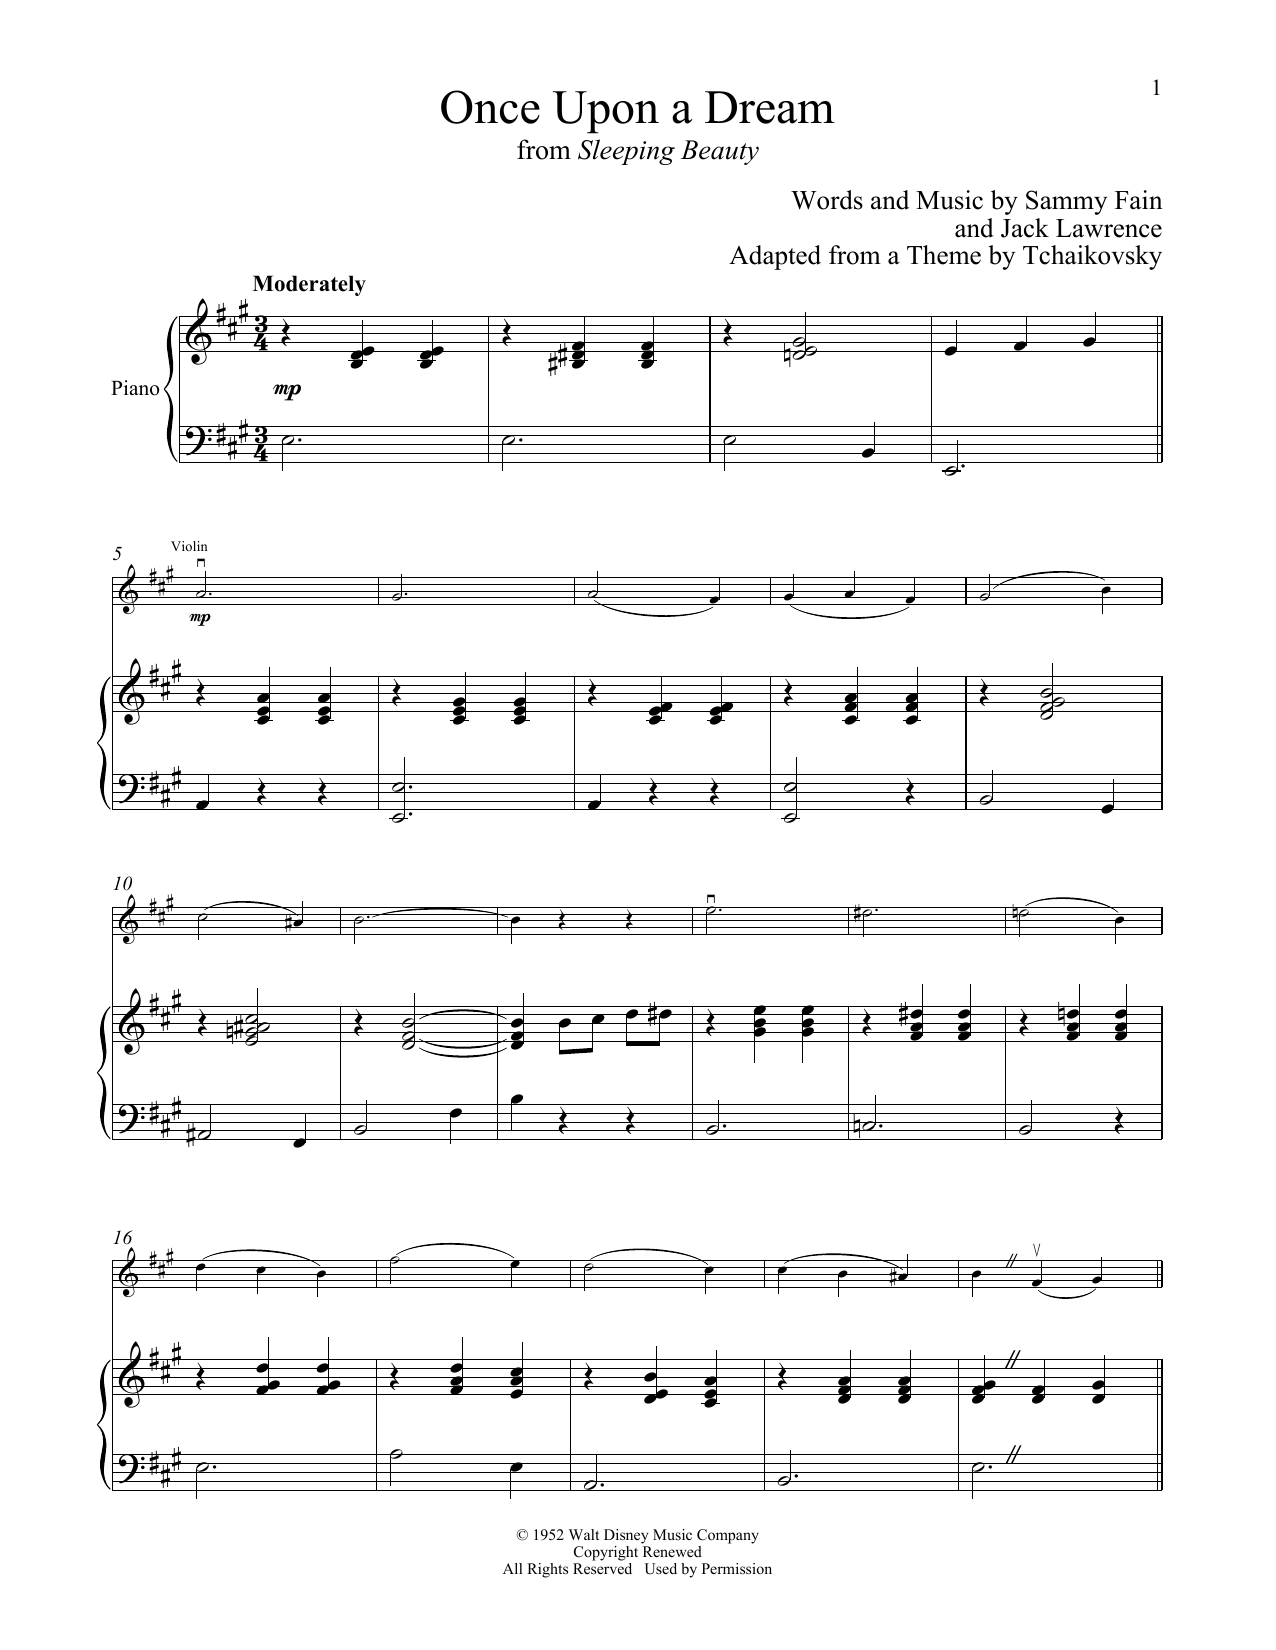 Download Sammy Fain & Jack Lawrence Once Upon A Dream (from Sleeping Beauty Sheet Music